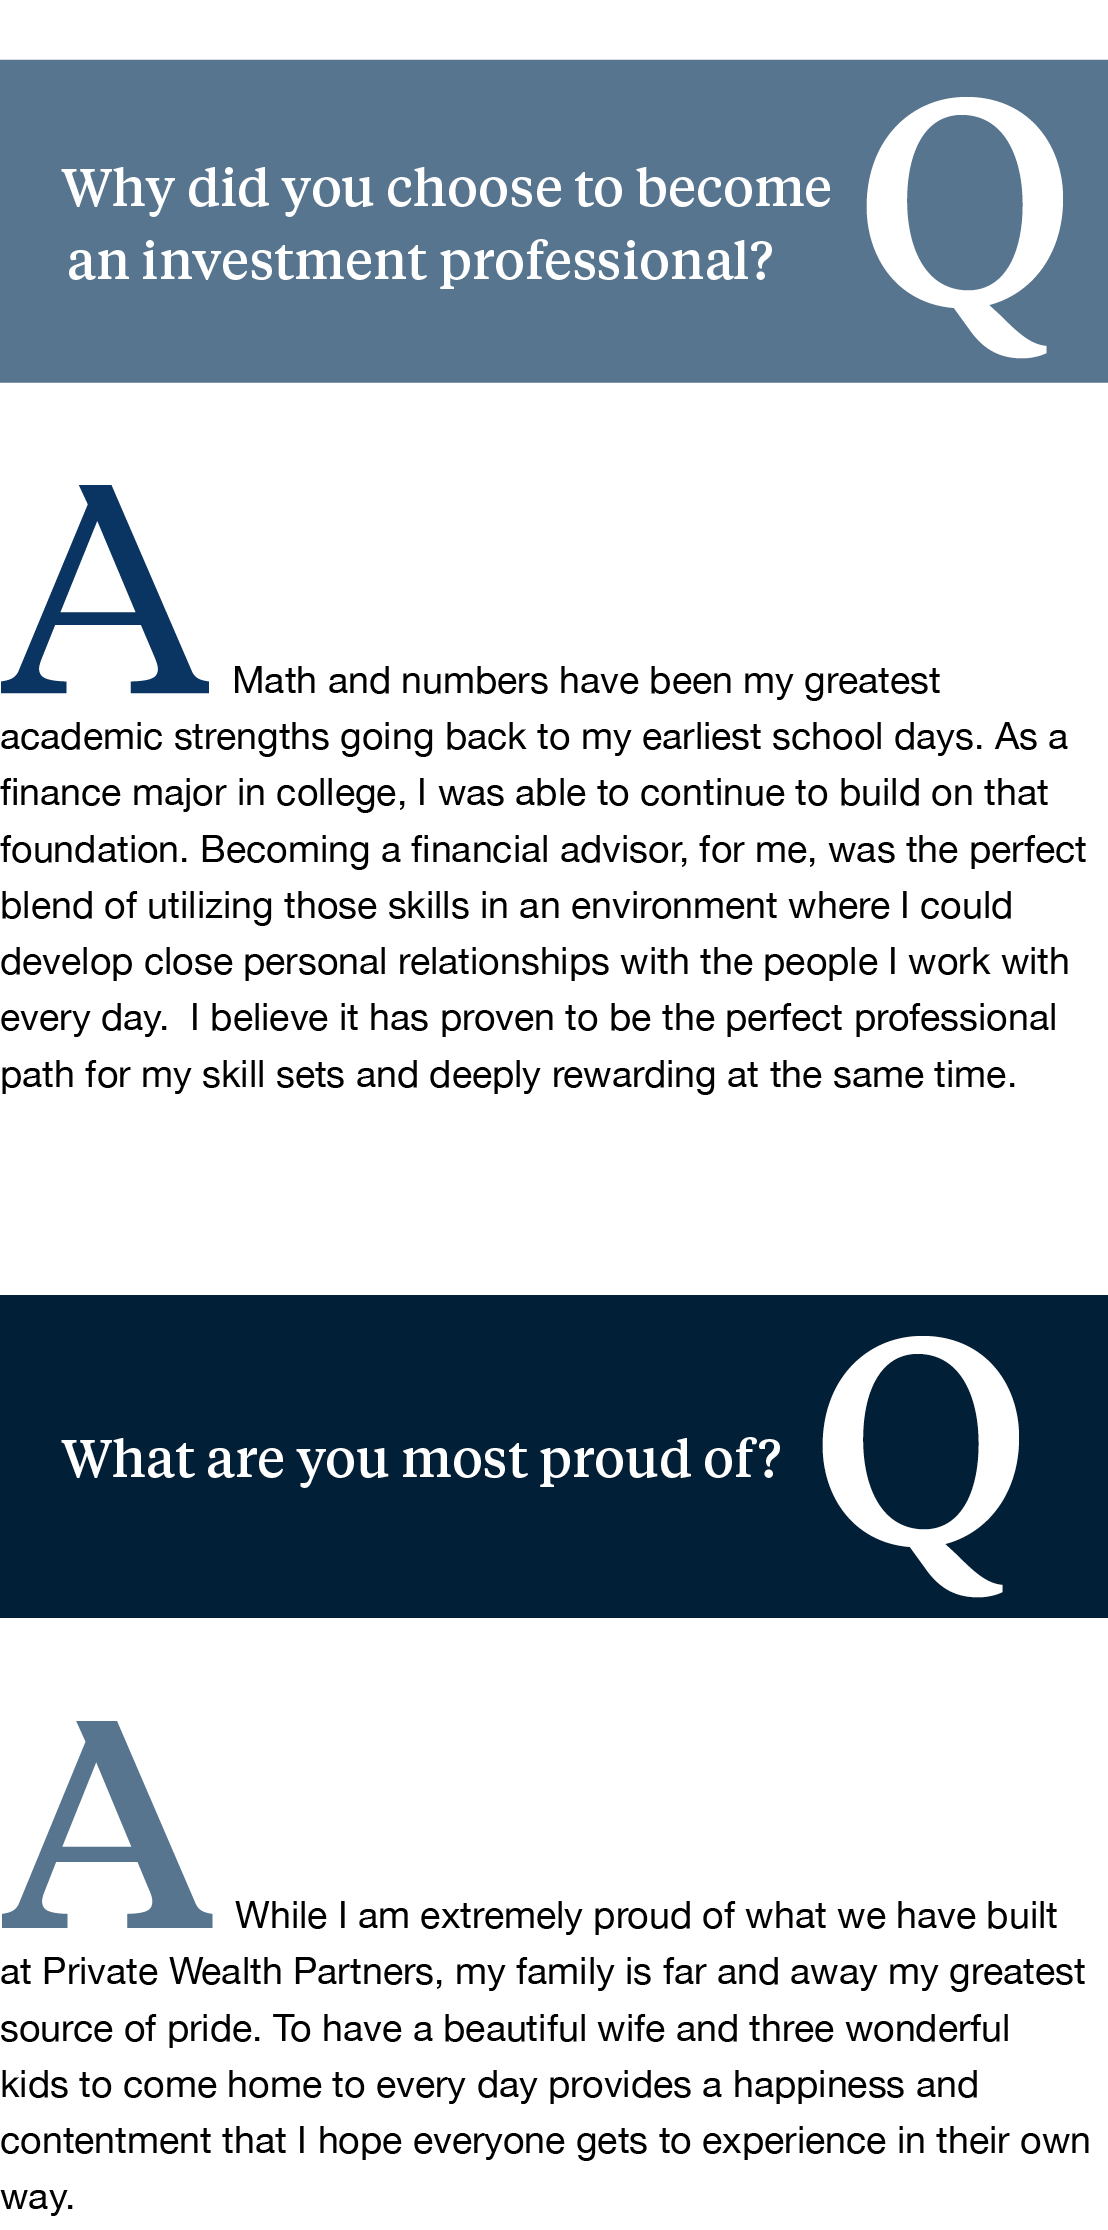 mark q and a 1.png